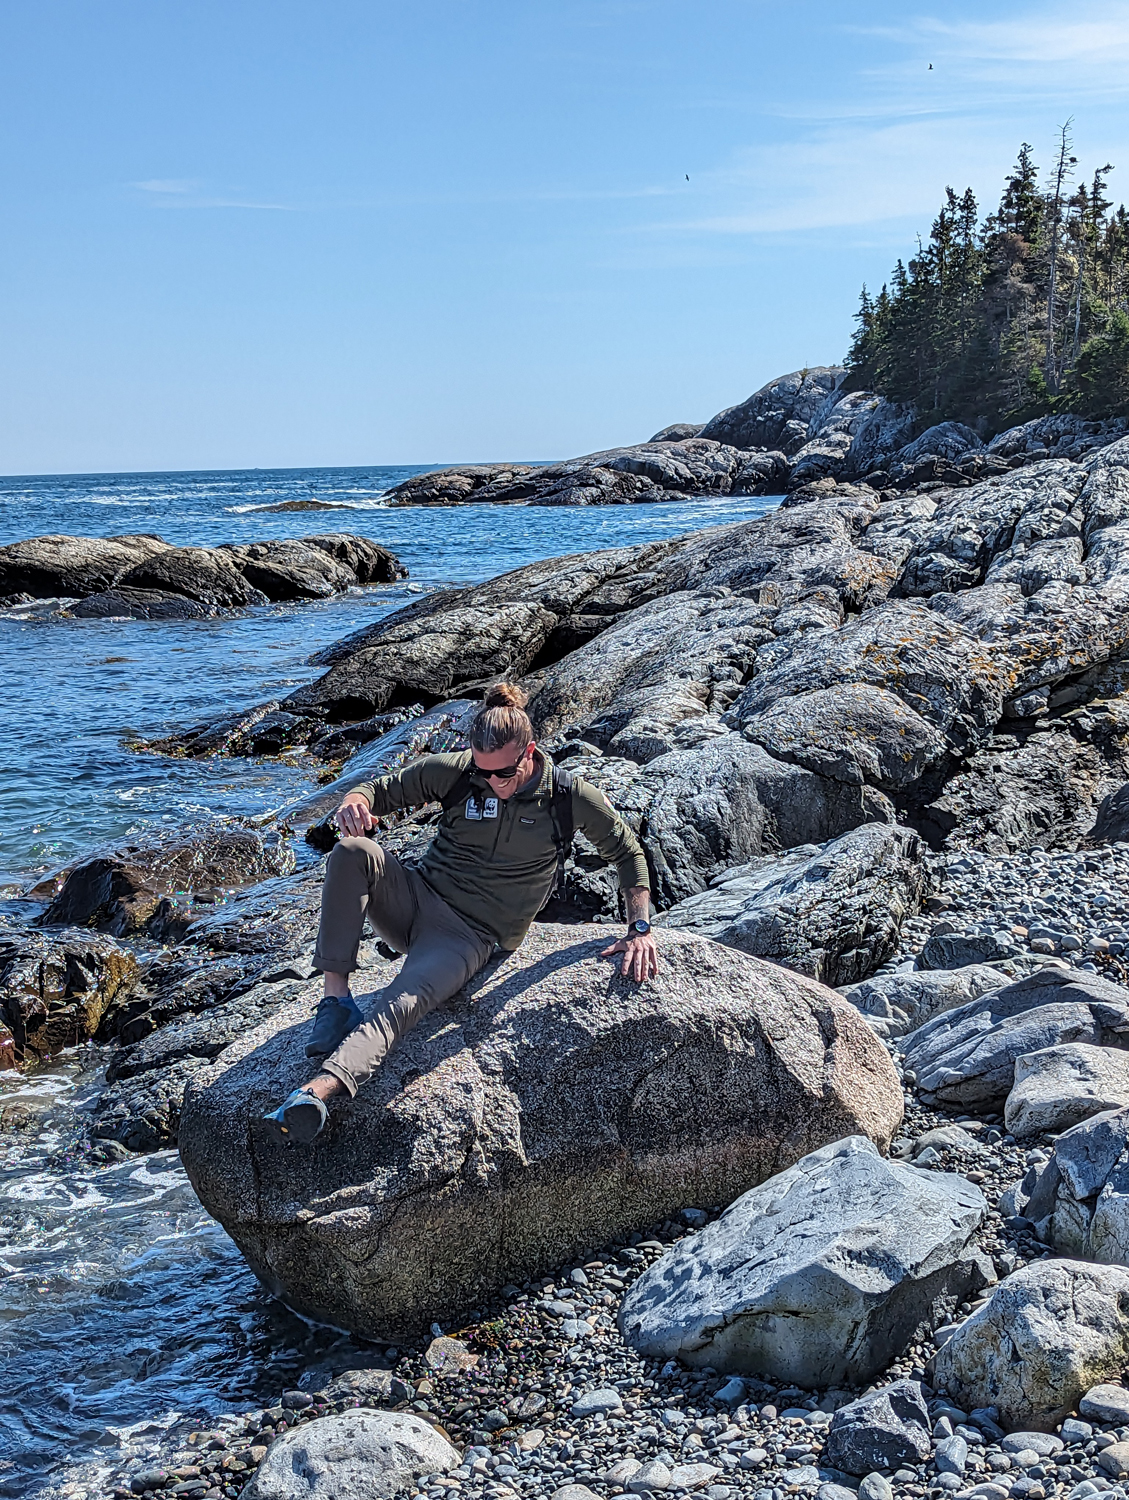 Playing on the rocks in Acadia National Park.